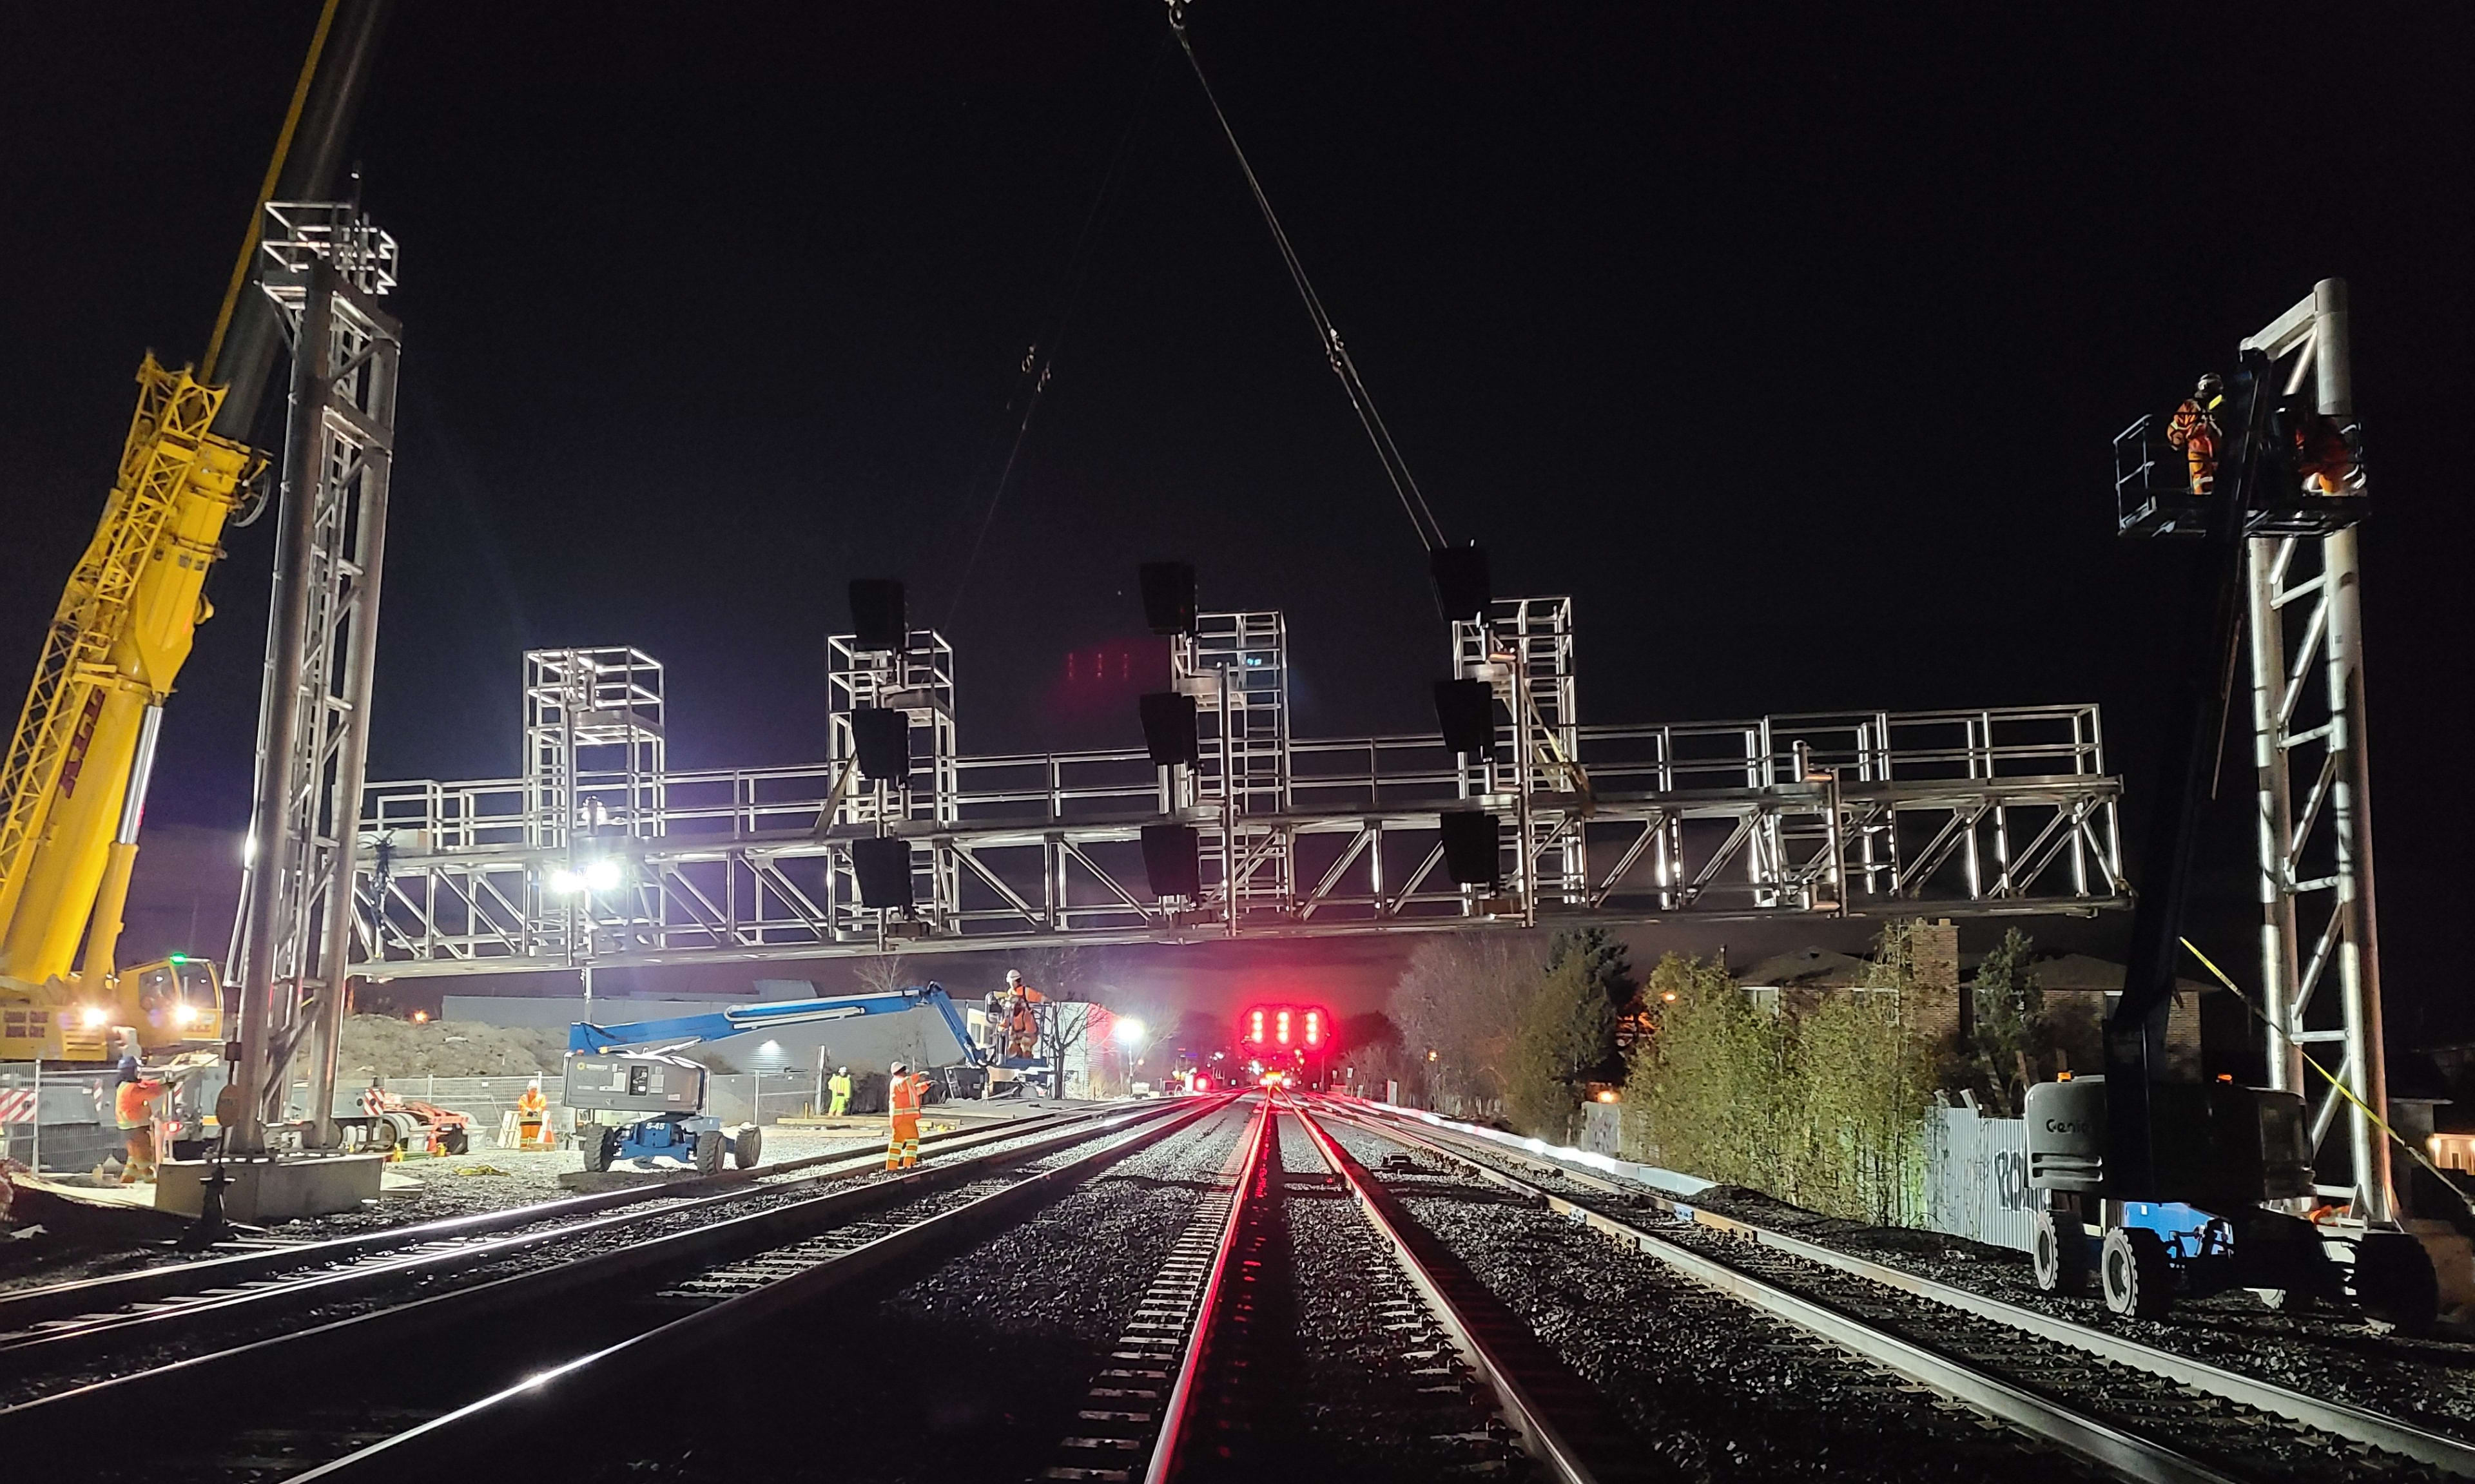 A new signal bridge is installed over the tracks